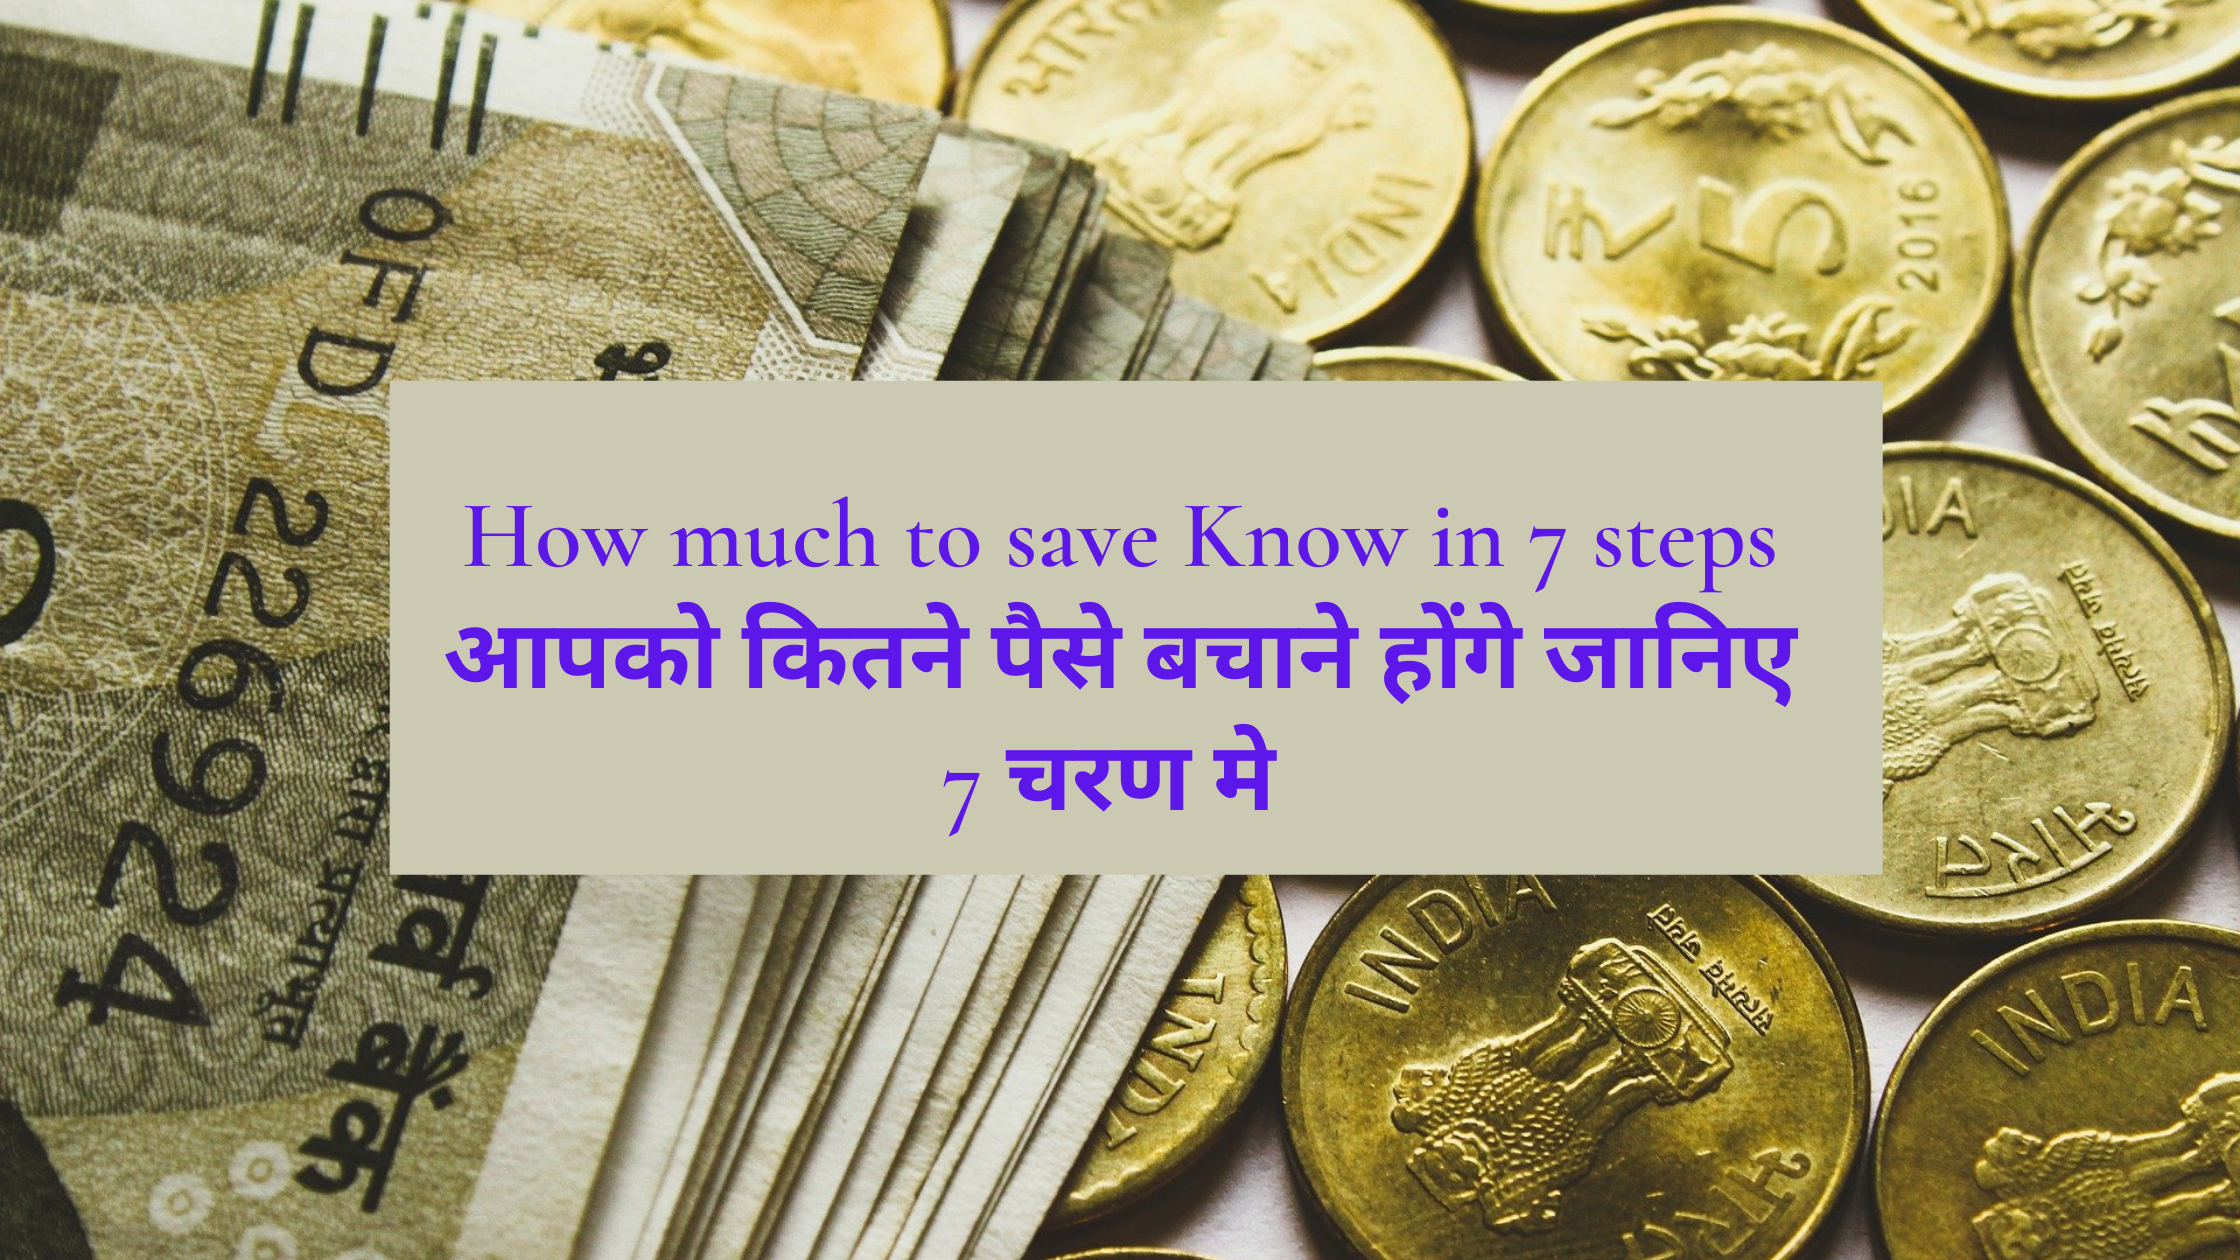 Read more about the article How much to save Know in 7 steps आपको कितने पैसे बचाने होंगे जानिए 7 चरण मे